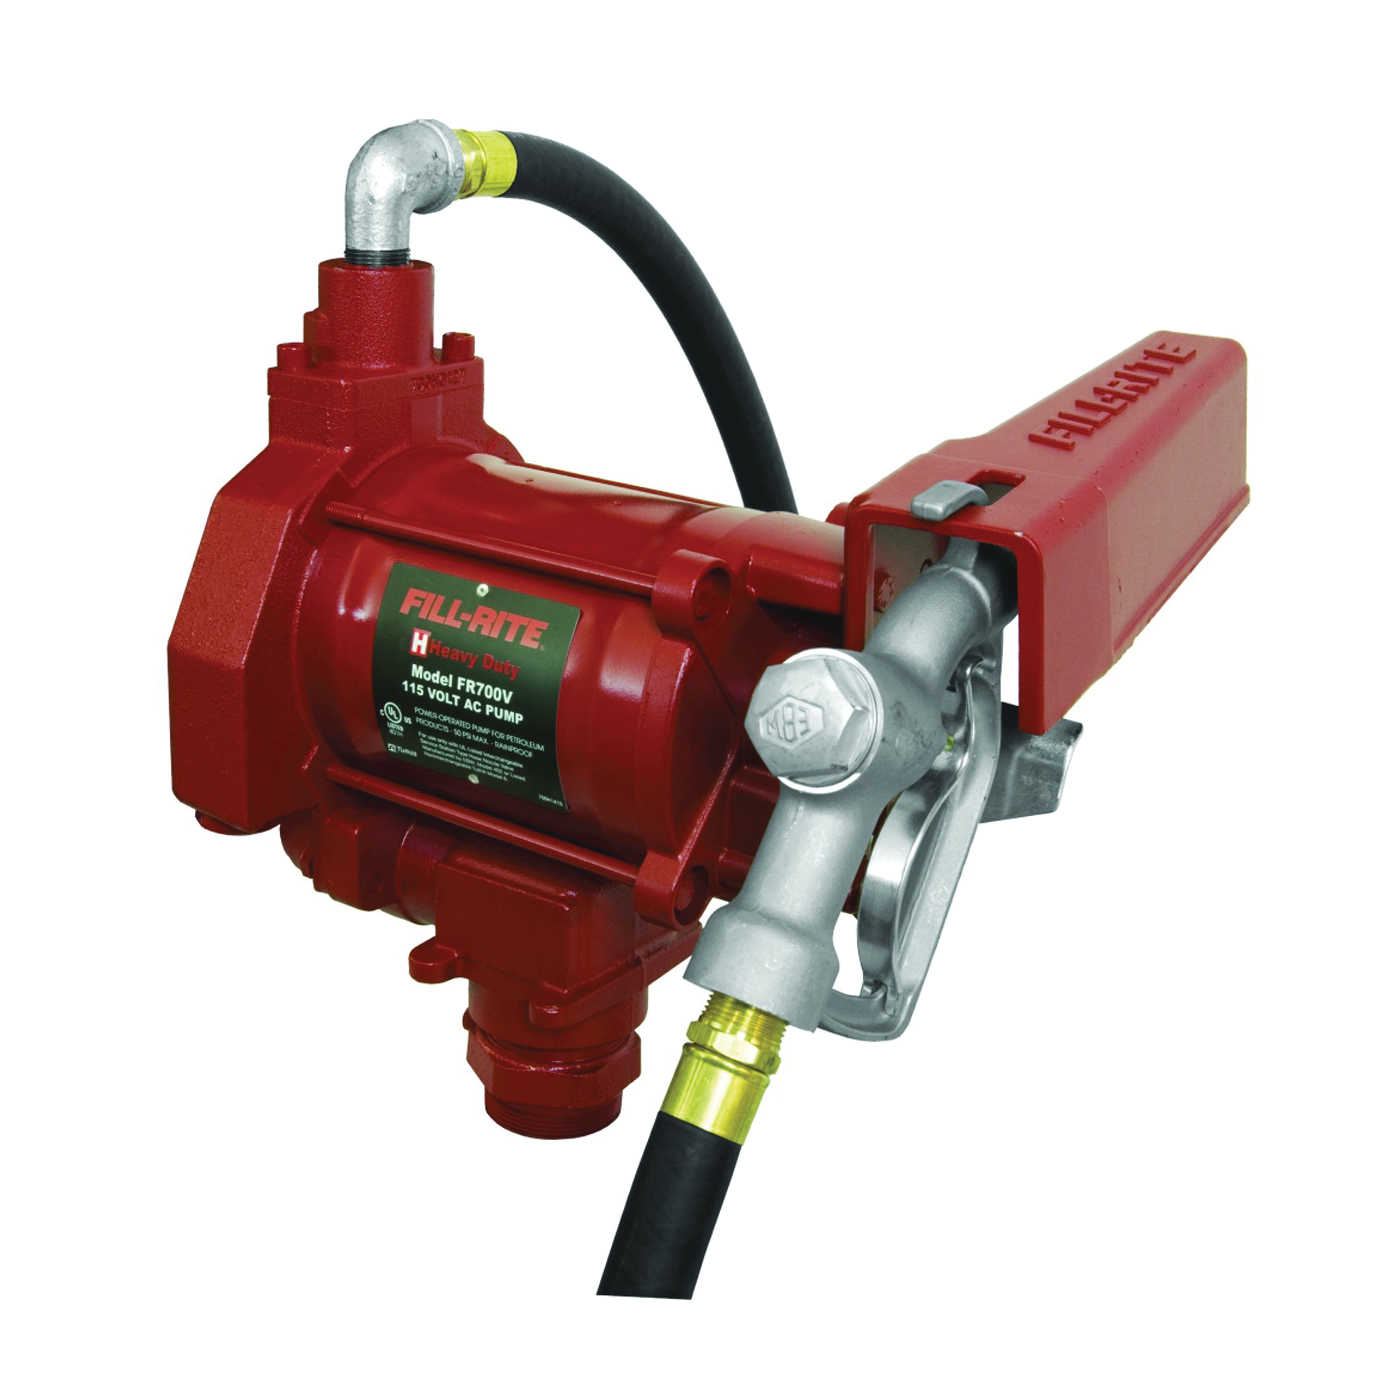 FR700V Fuel Transfer Pump, Motor: 1/3 hp, 115 VAC, 5.5 A, 1725 rpm, 30 min Duty Cycle, 3/4 in Outlet